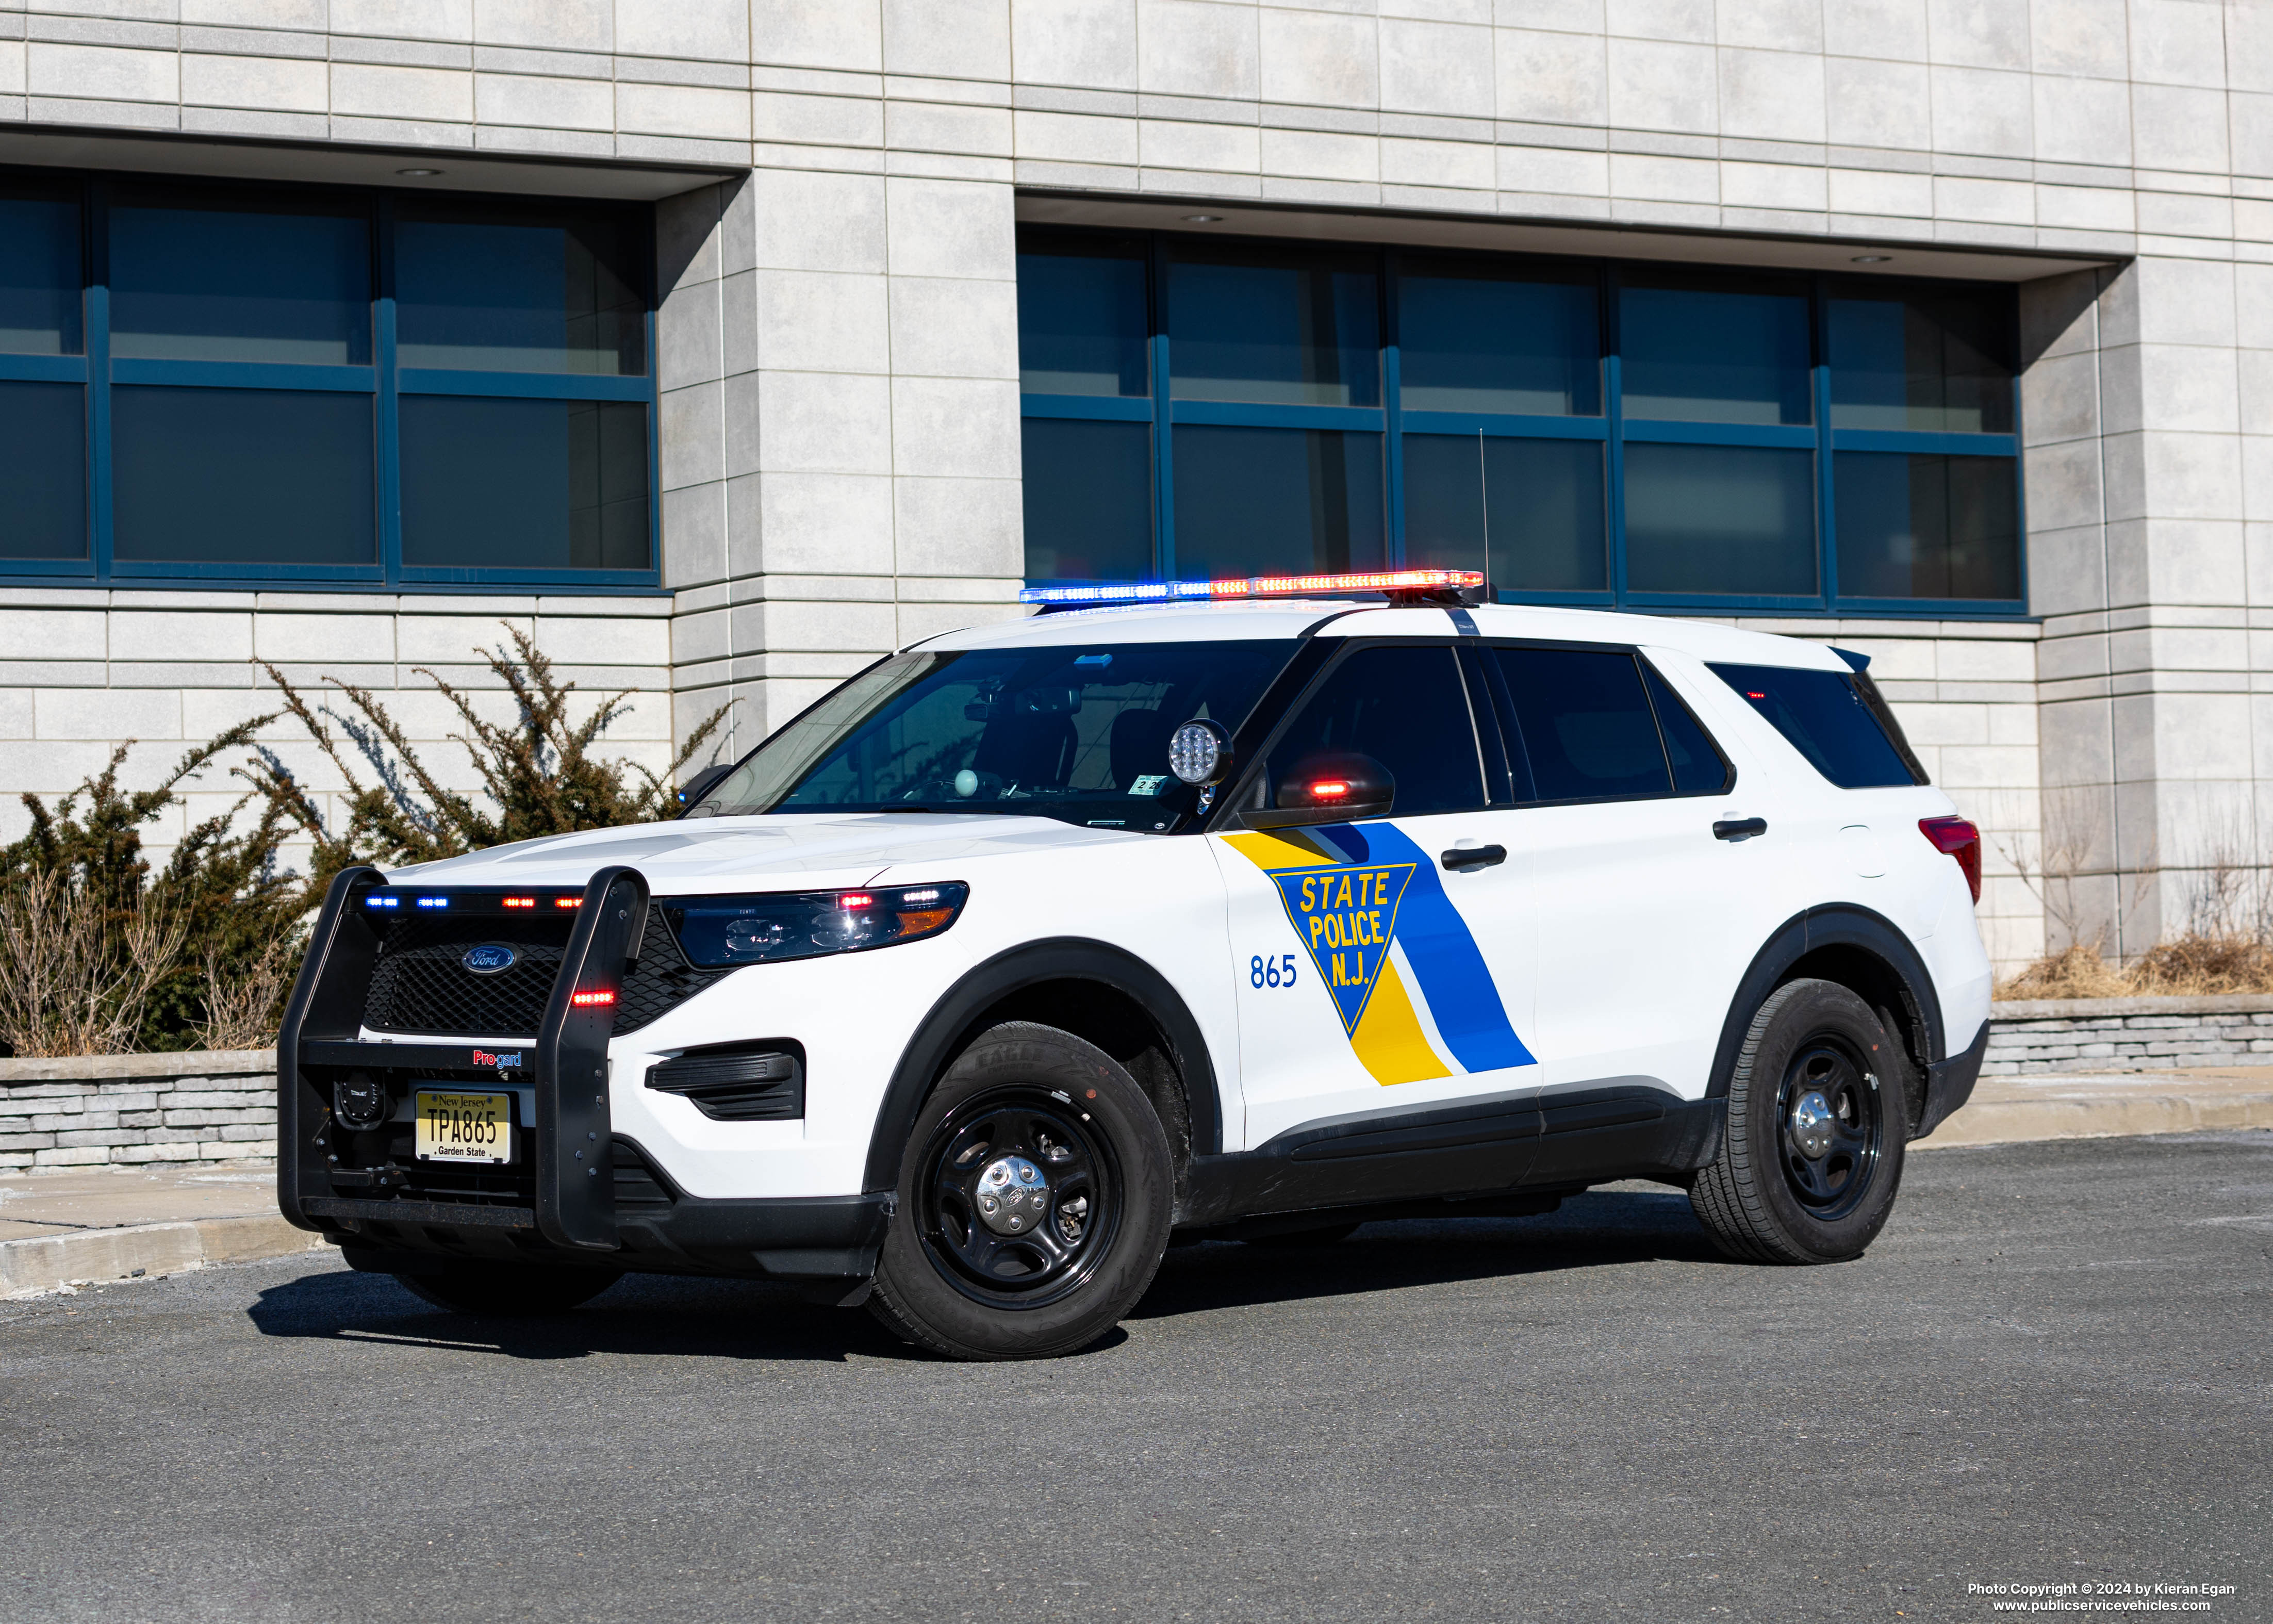 A photo  of New Jersey State Police
            Cruiser 865, a 2023 Ford Police Interceptor Utility             taken by Kieran Egan